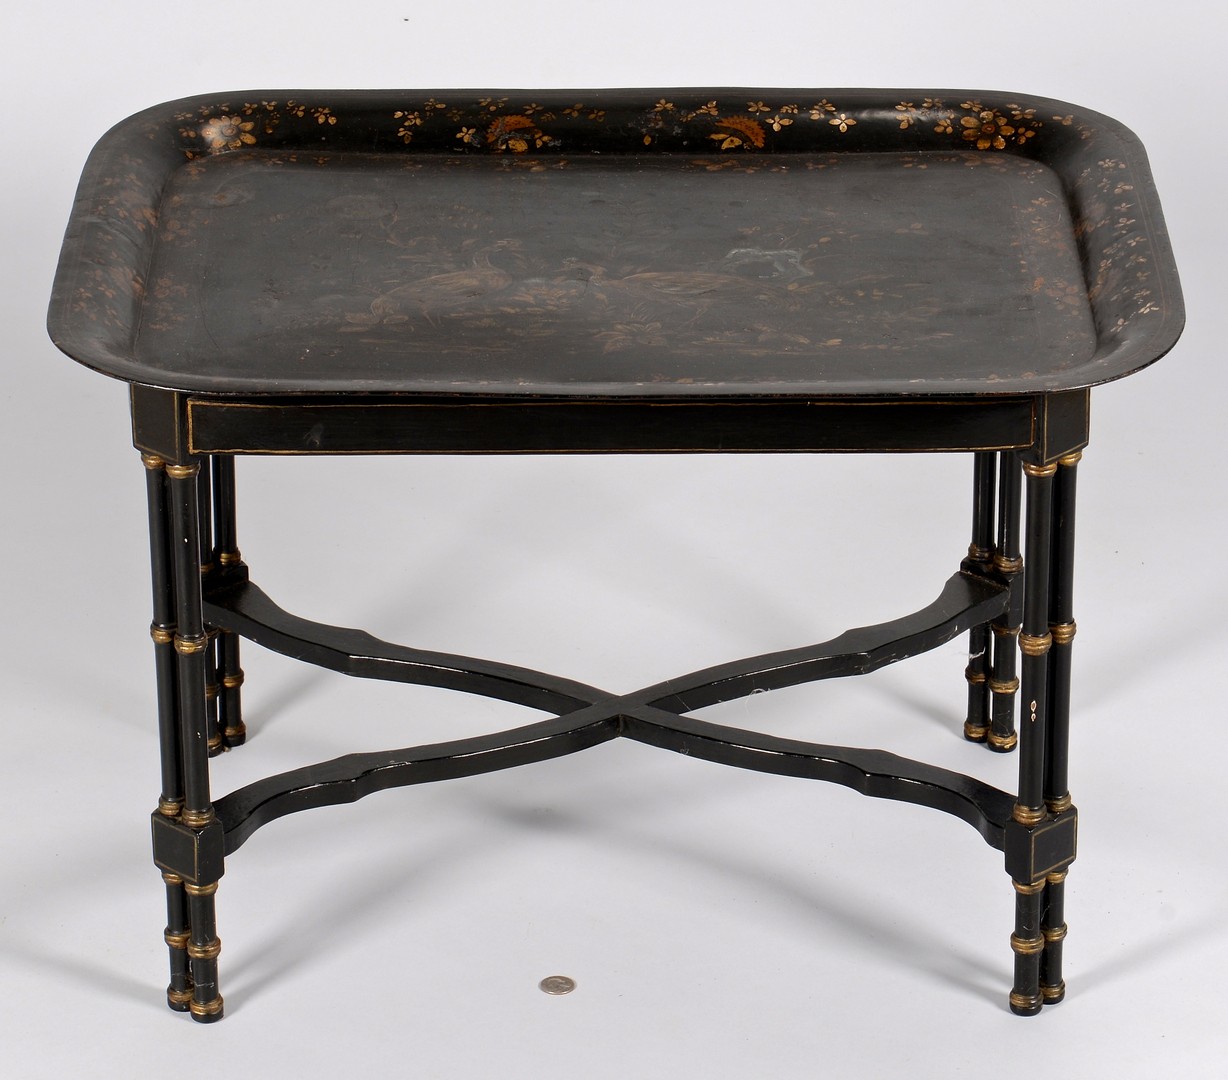 Lot 310: Victorian Toile Tray on Lacquer Stand